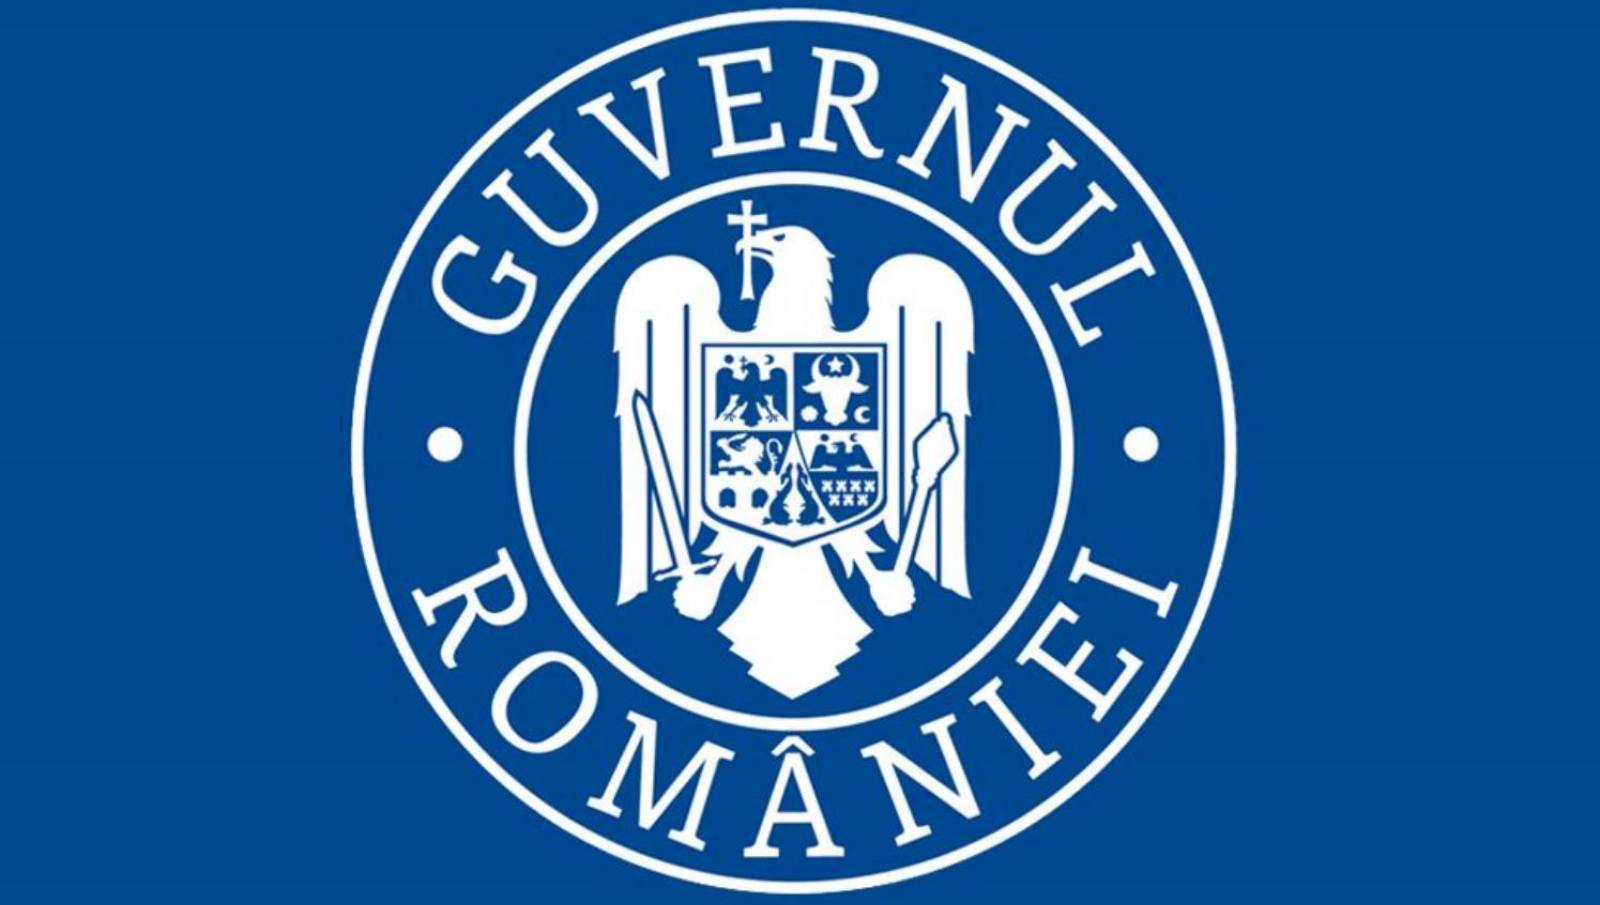 The Romanian government food waste